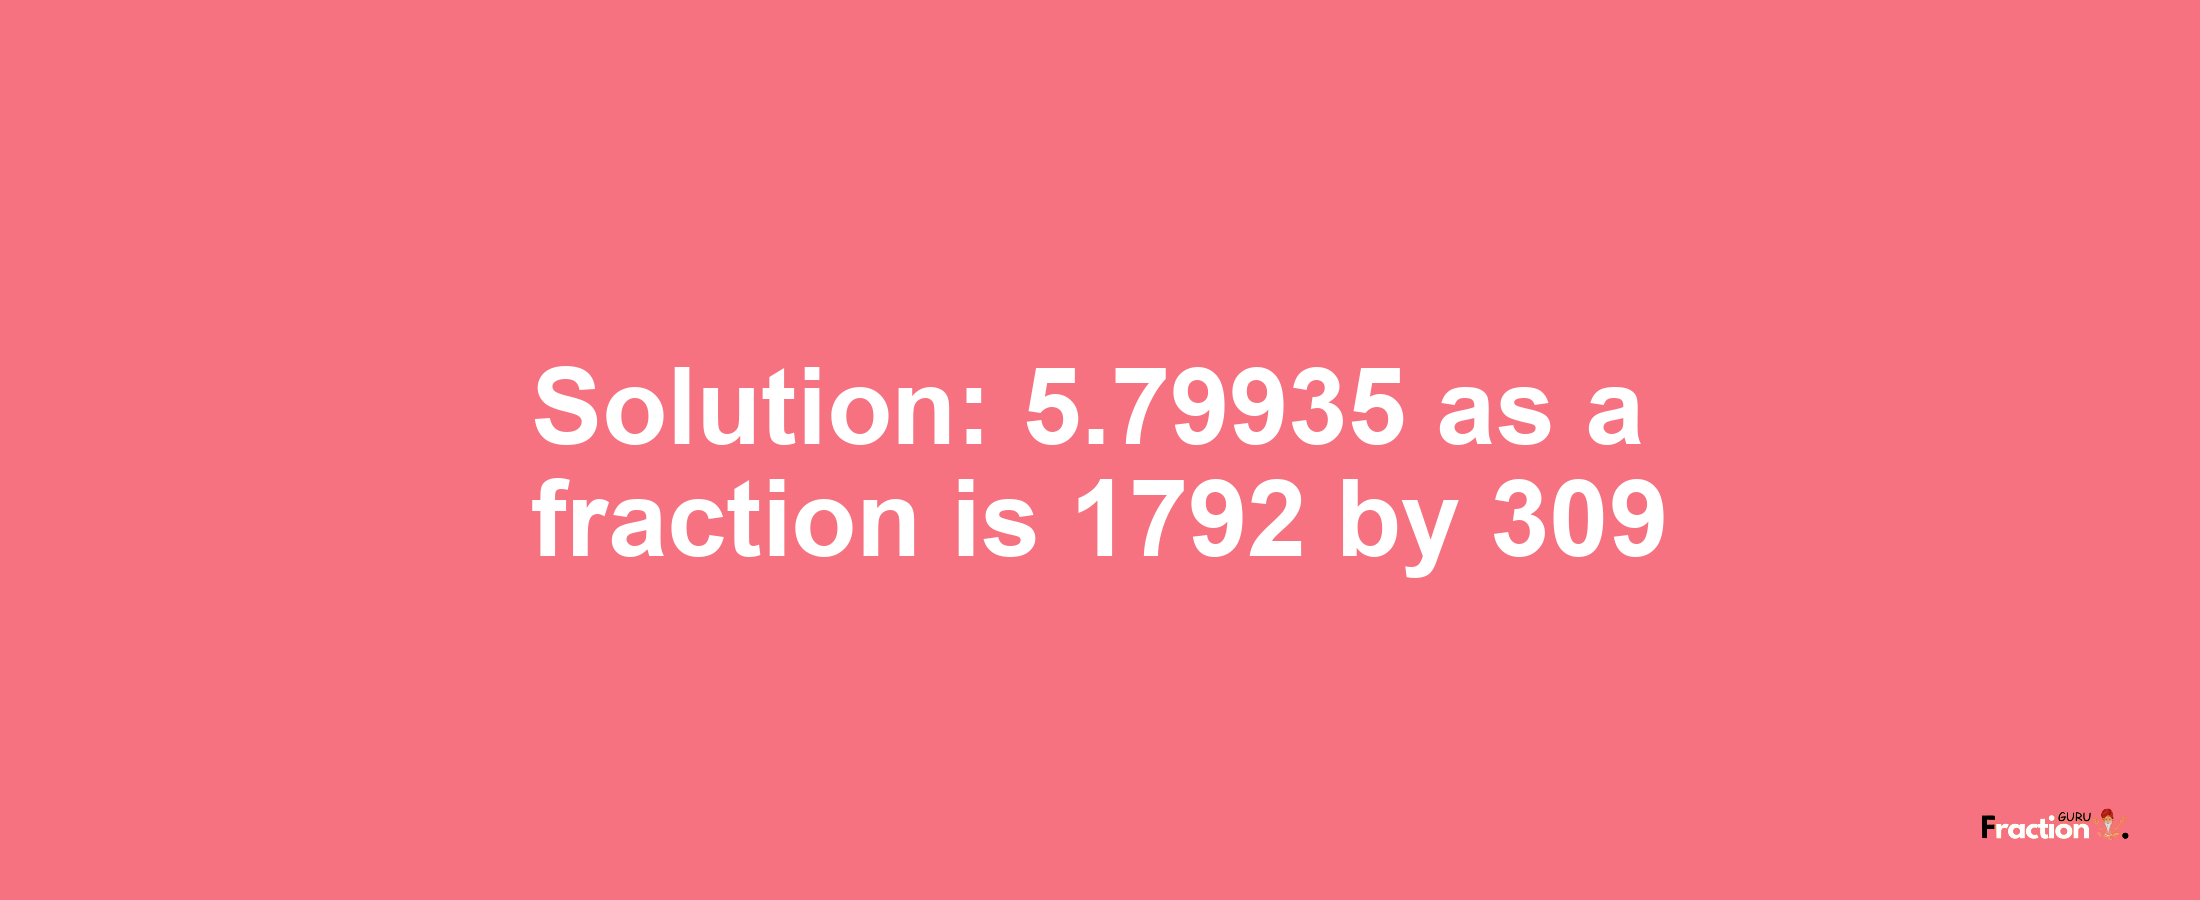 Solution:5.79935 as a fraction is 1792/309